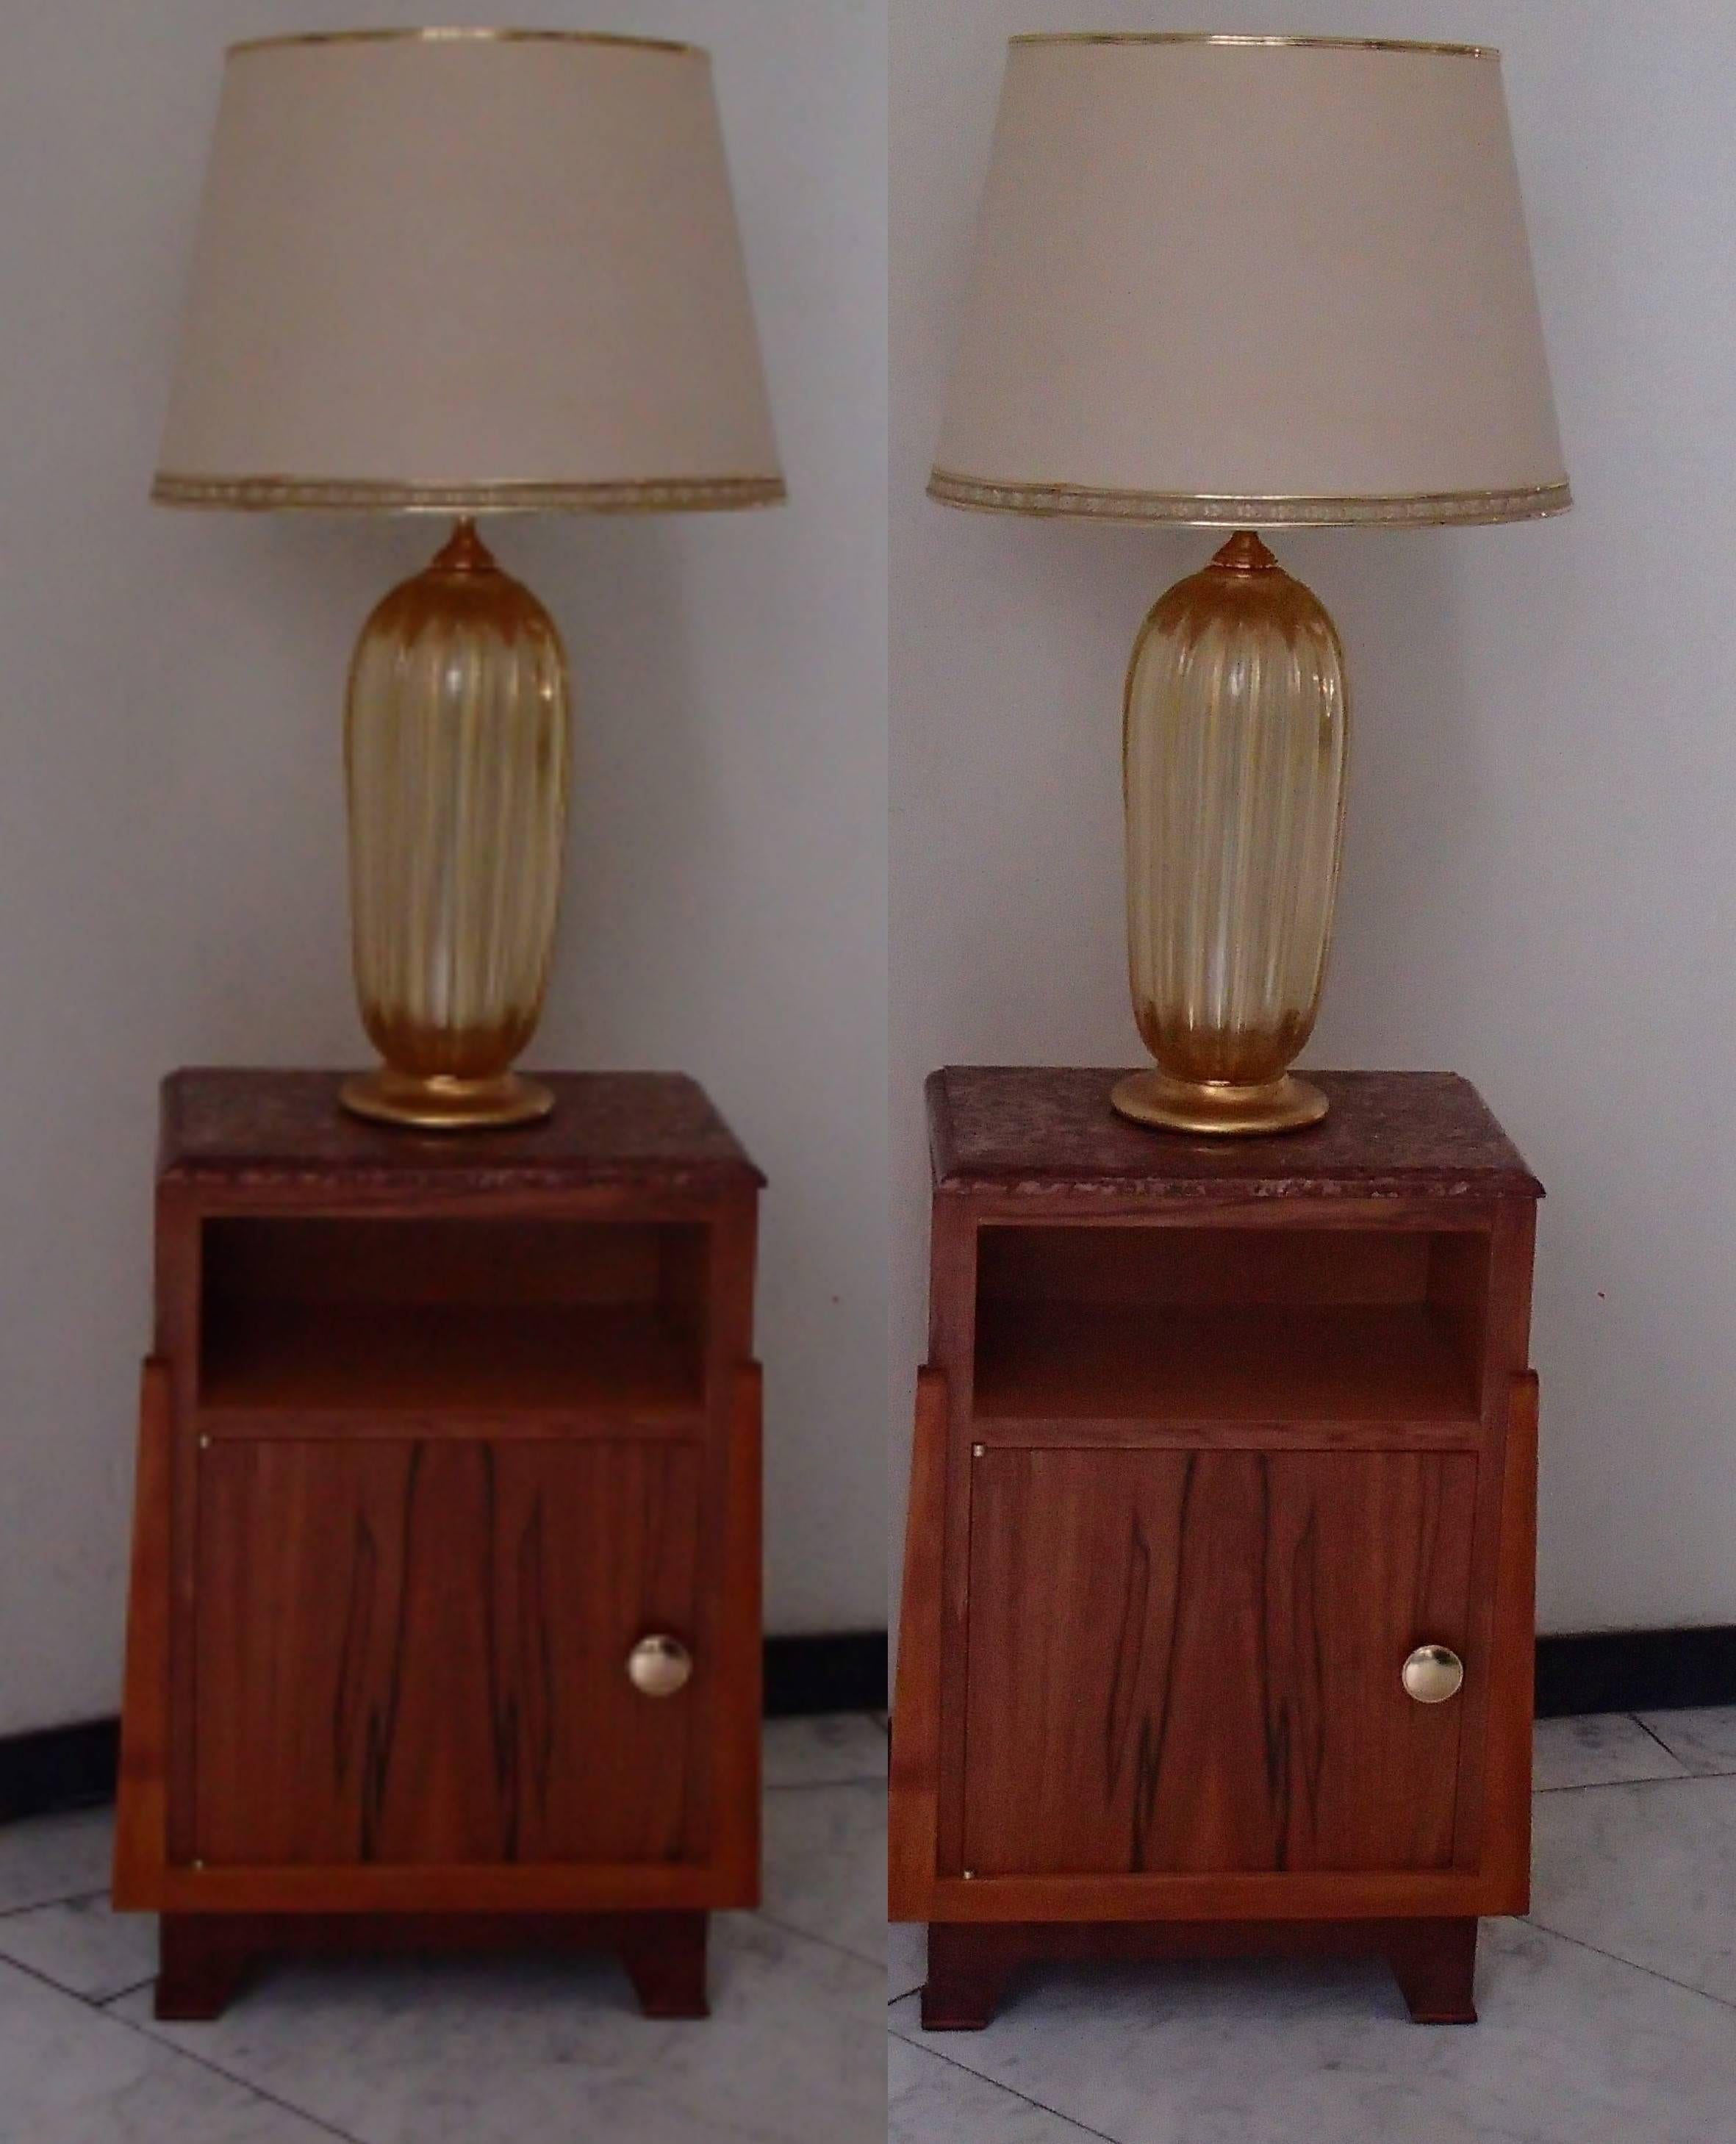 Pair of tall Barovier e Toso Murano table lamps with gold inlays and cream with shades.